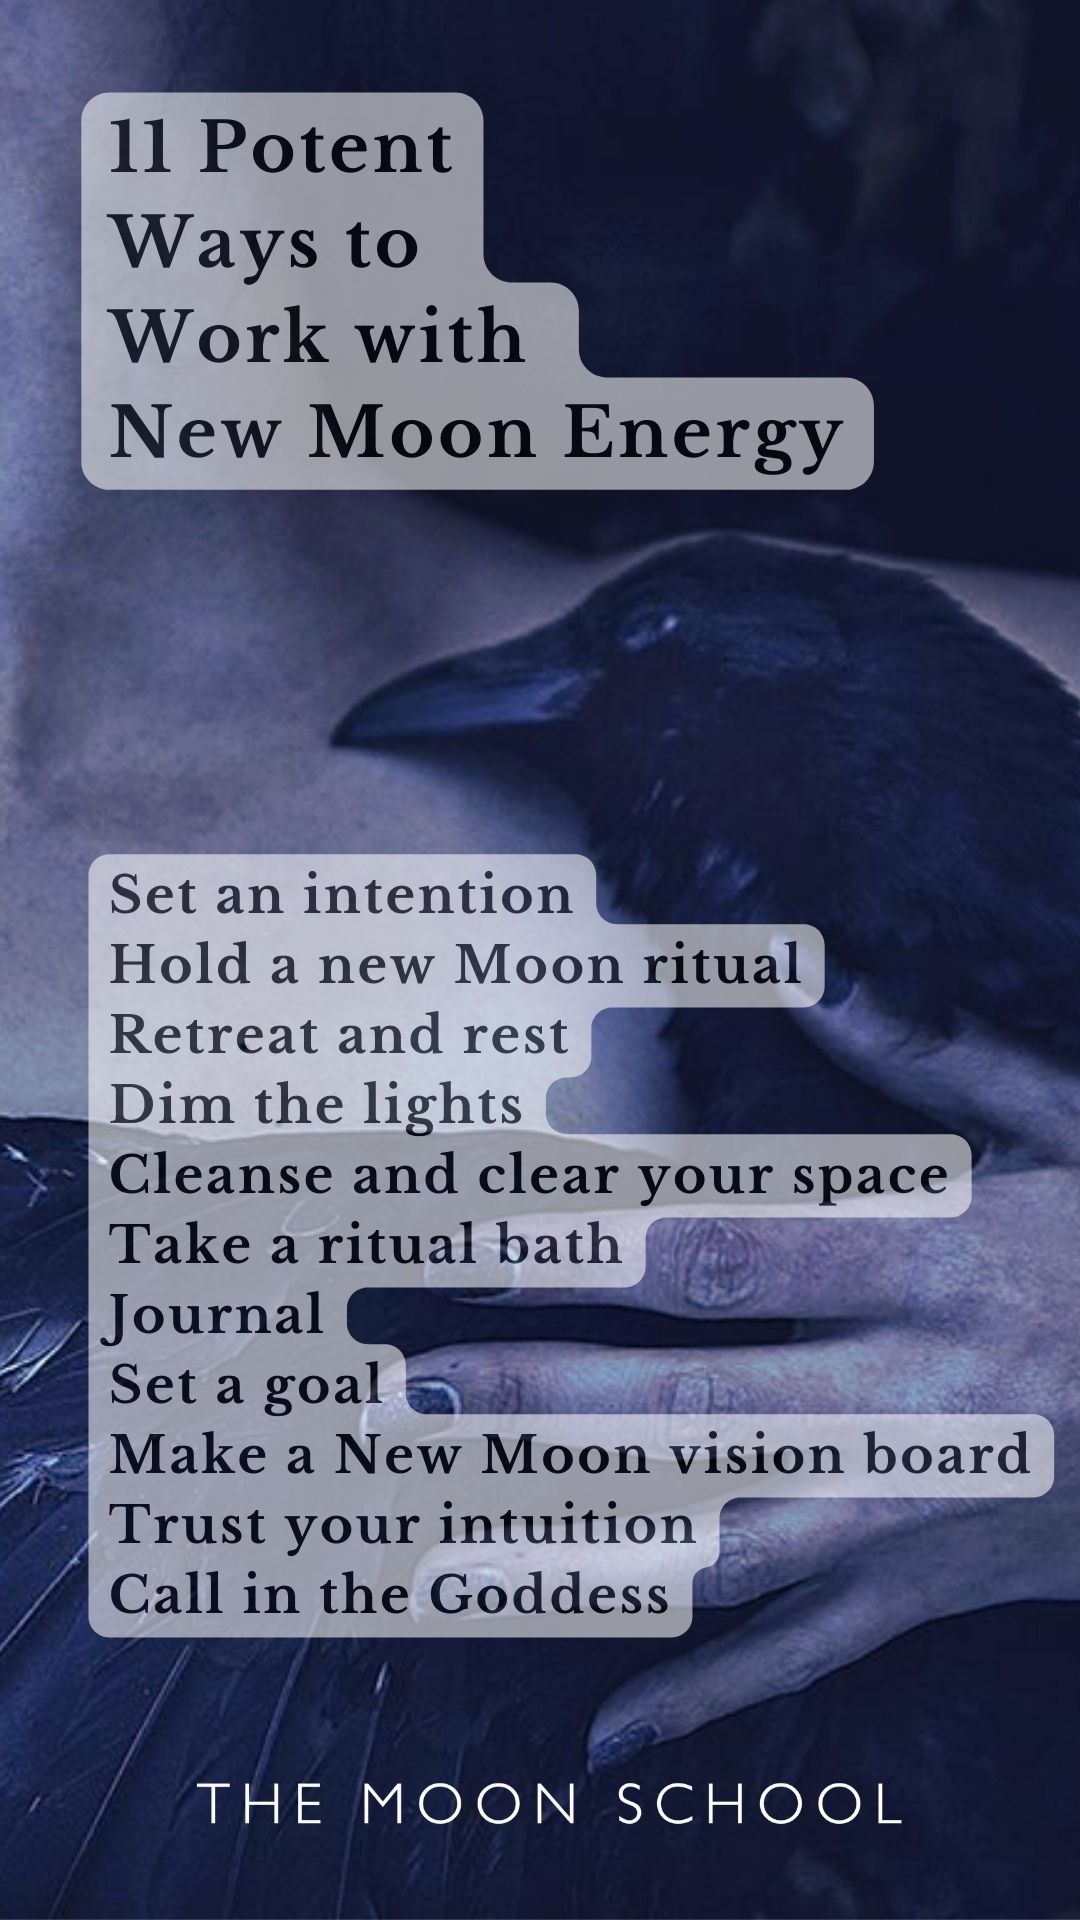 11 POTENT Ways to Work with New Moon Energy PIN